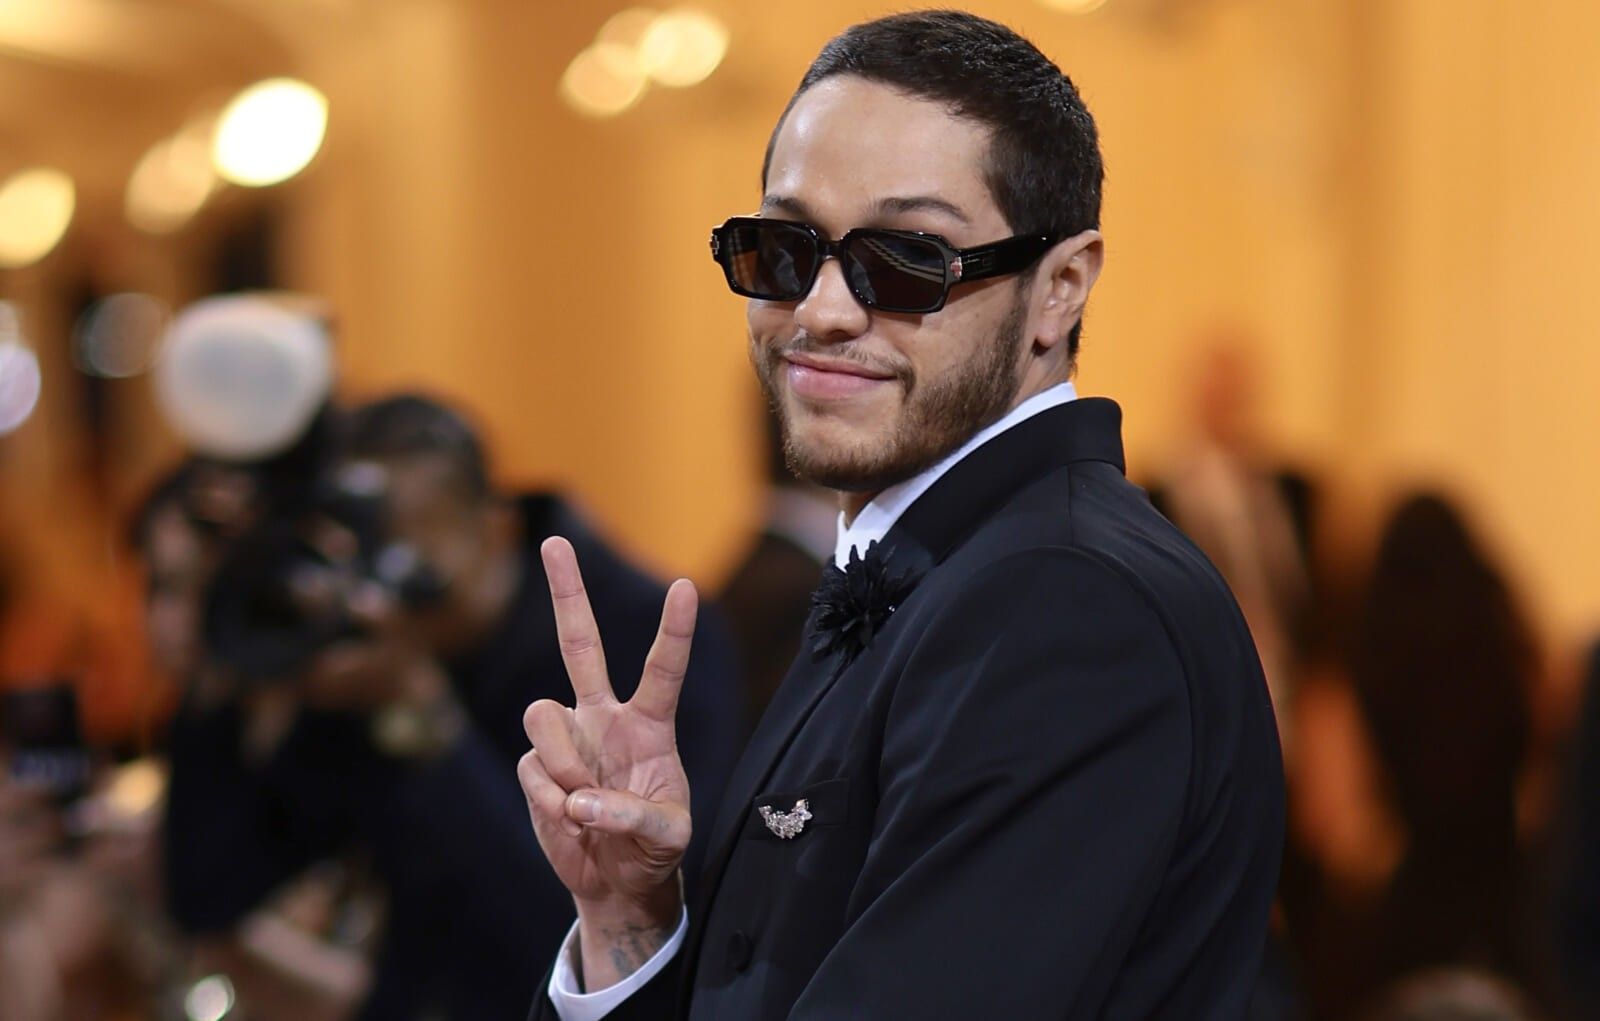 Pete Davidson attends The 2022 Met Gala Celebrating "In America: An Anthology of Fashion" at The Metropolitan Museum of Art on May 02, 2022 in New York City